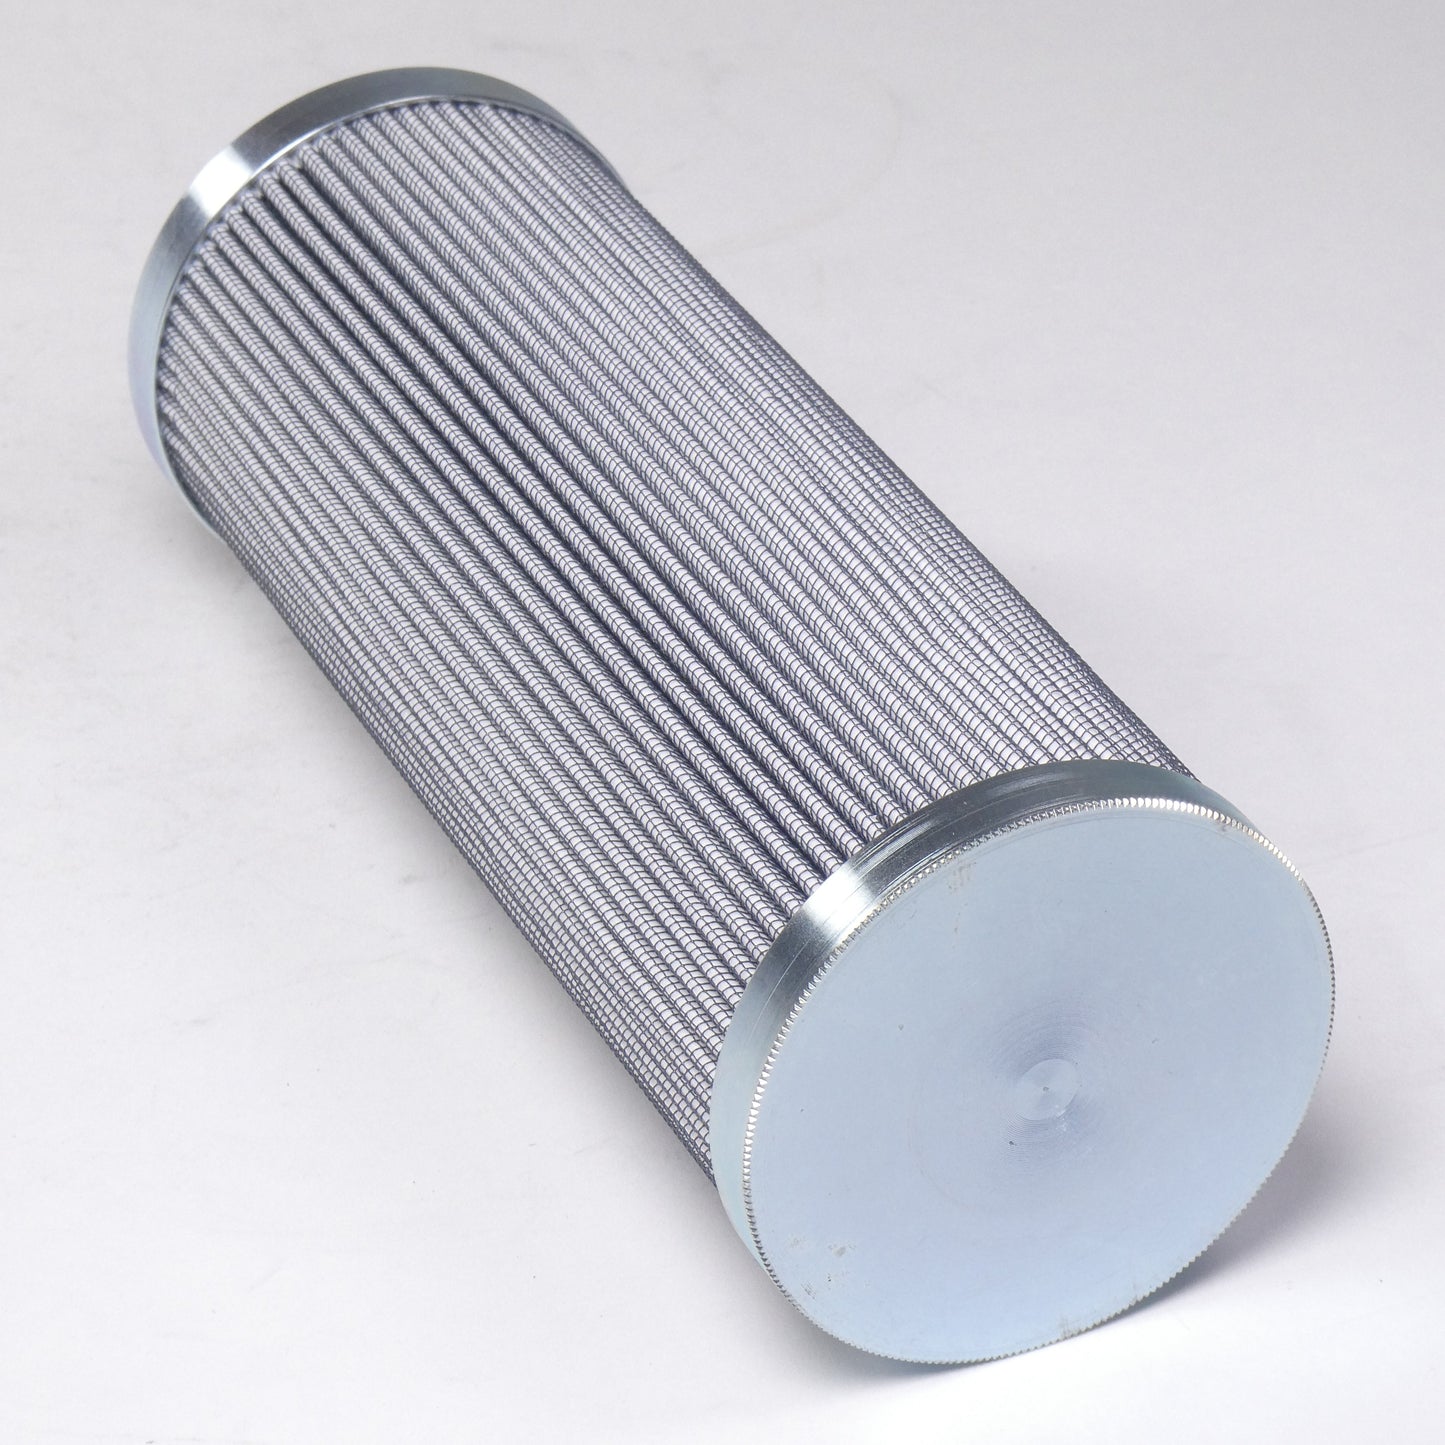 Hydrafil Replacement Filter Element for Pall HC9601FDT8H